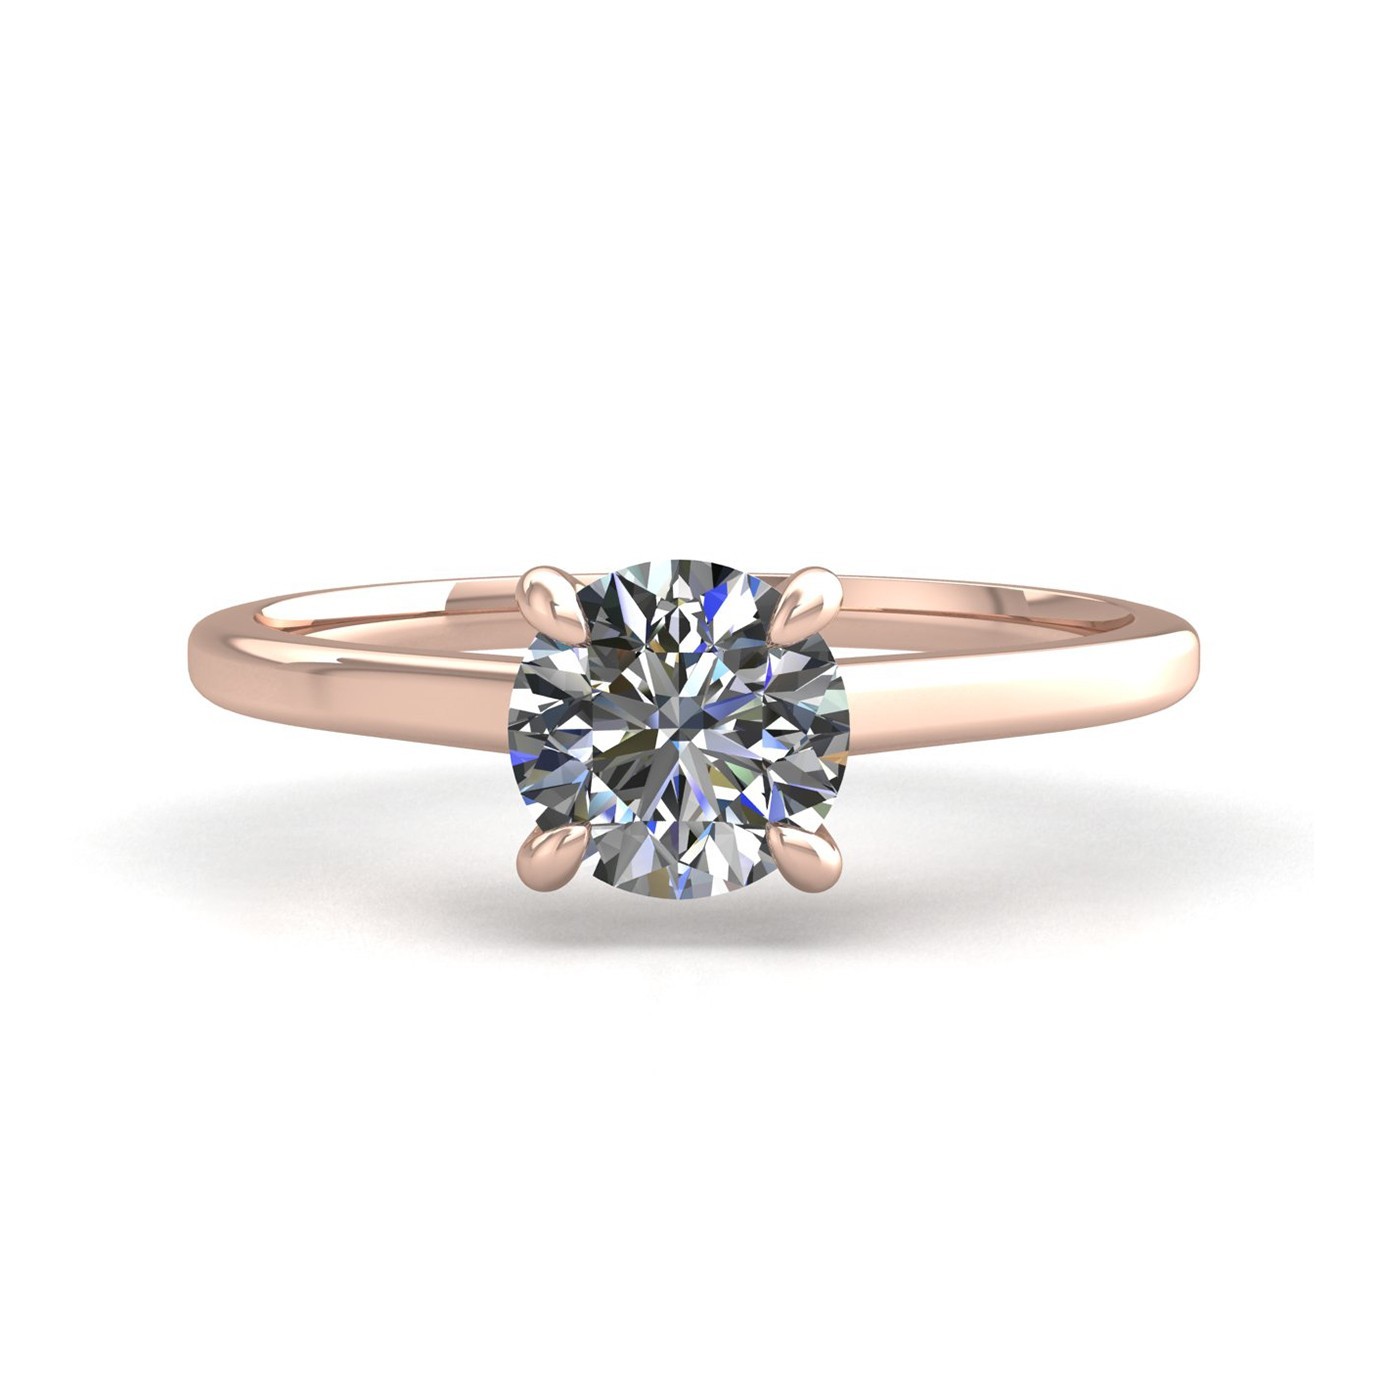 18k rose gold 1.5ct 4 prongs solitaire round cut diamond engagement ring with whisper thin band Photos & images